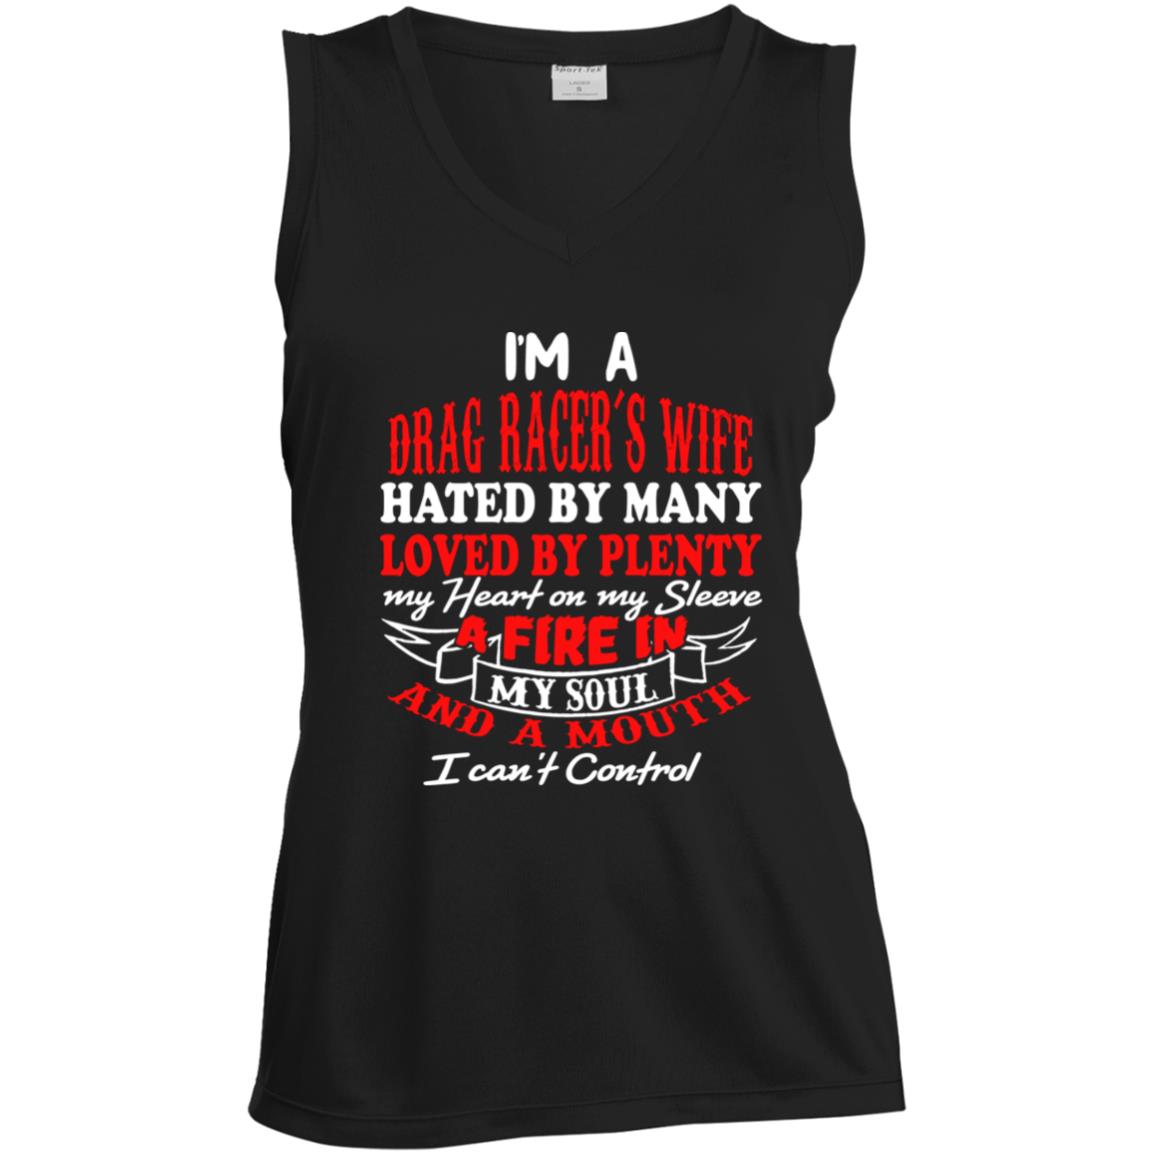 I'm A Drag Racer's Wife Hated By Many Loved By Plenty Ladies' Sleeveless V-Neck Performance Tee